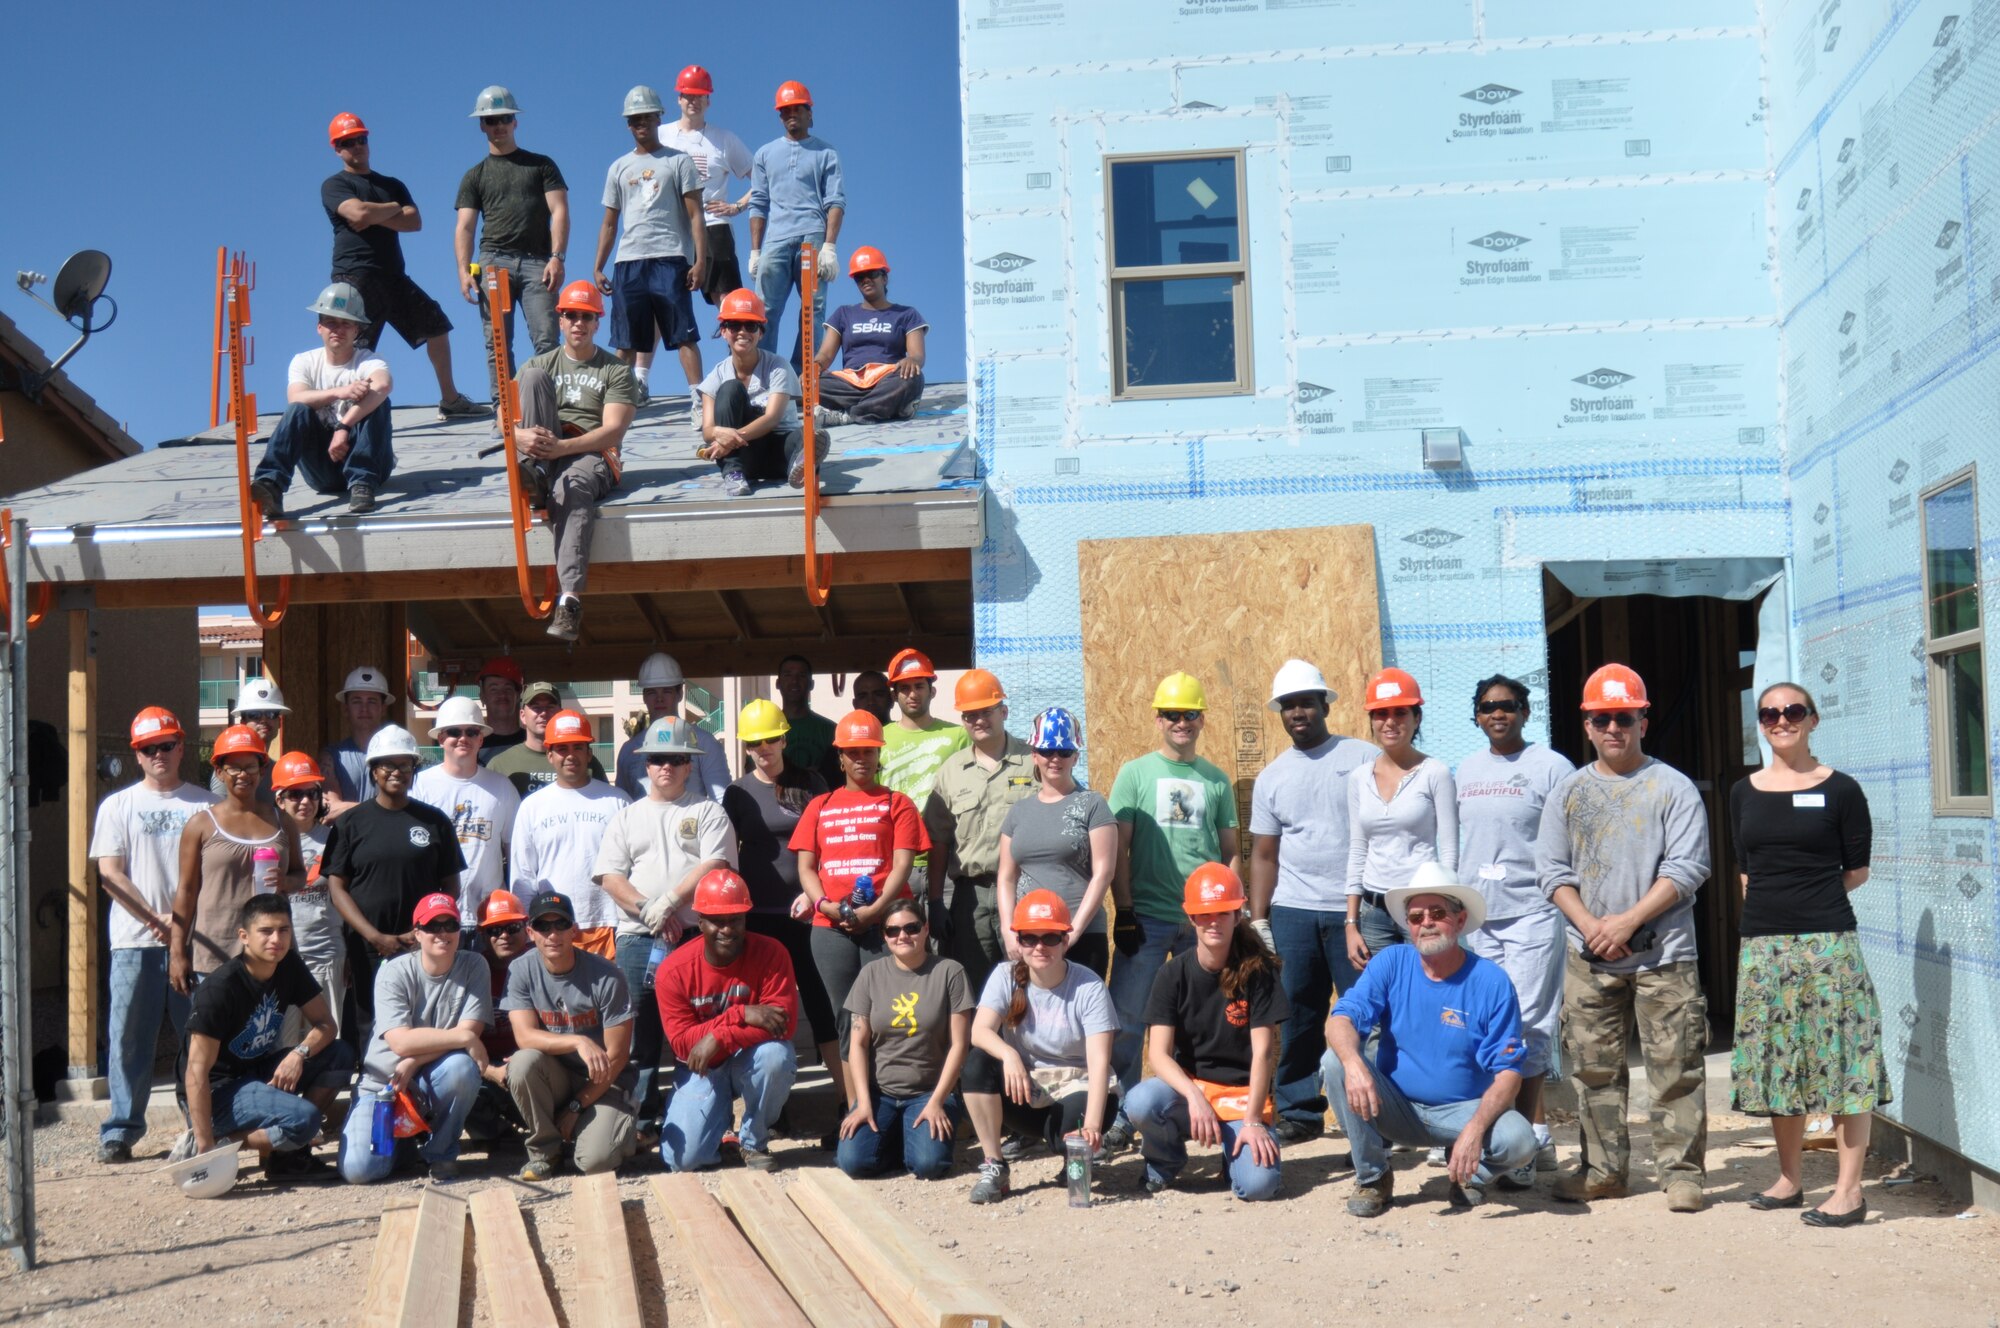 More than 45 Airmen from Davis-Monthan AFB came together to donate six hours of their off-duty time to build homes for Habitat for Humanity in Tucson, Ariz., March 14. (USAF photo by Master Sgt. Kelly Ogden/Released). 